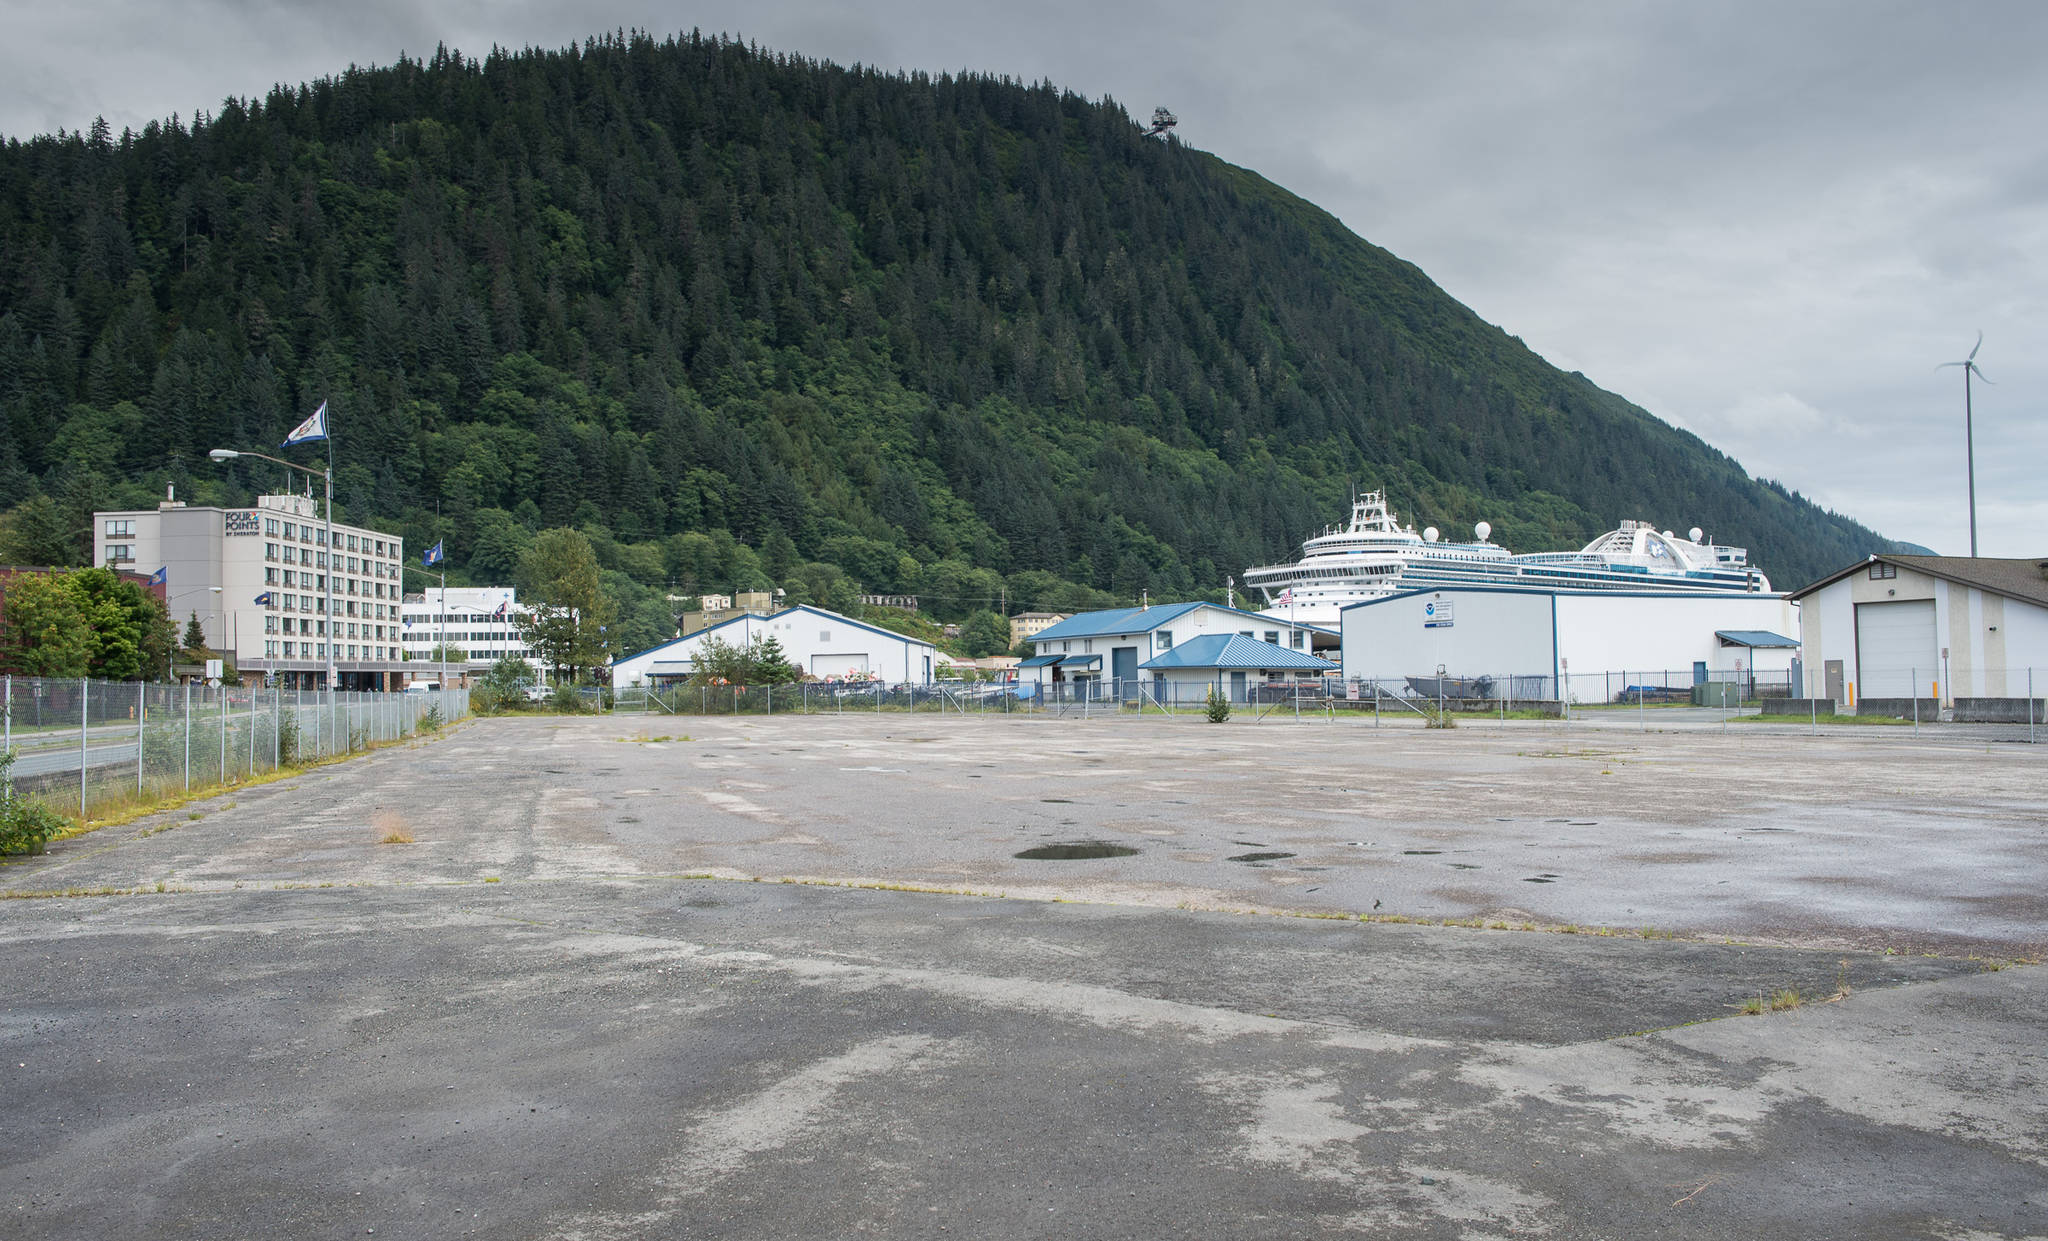 Juneau District Heating says it is close to closing on the sale of a section of the subport subdivision, pictured on Wednesday, Aug. 23, 2017.